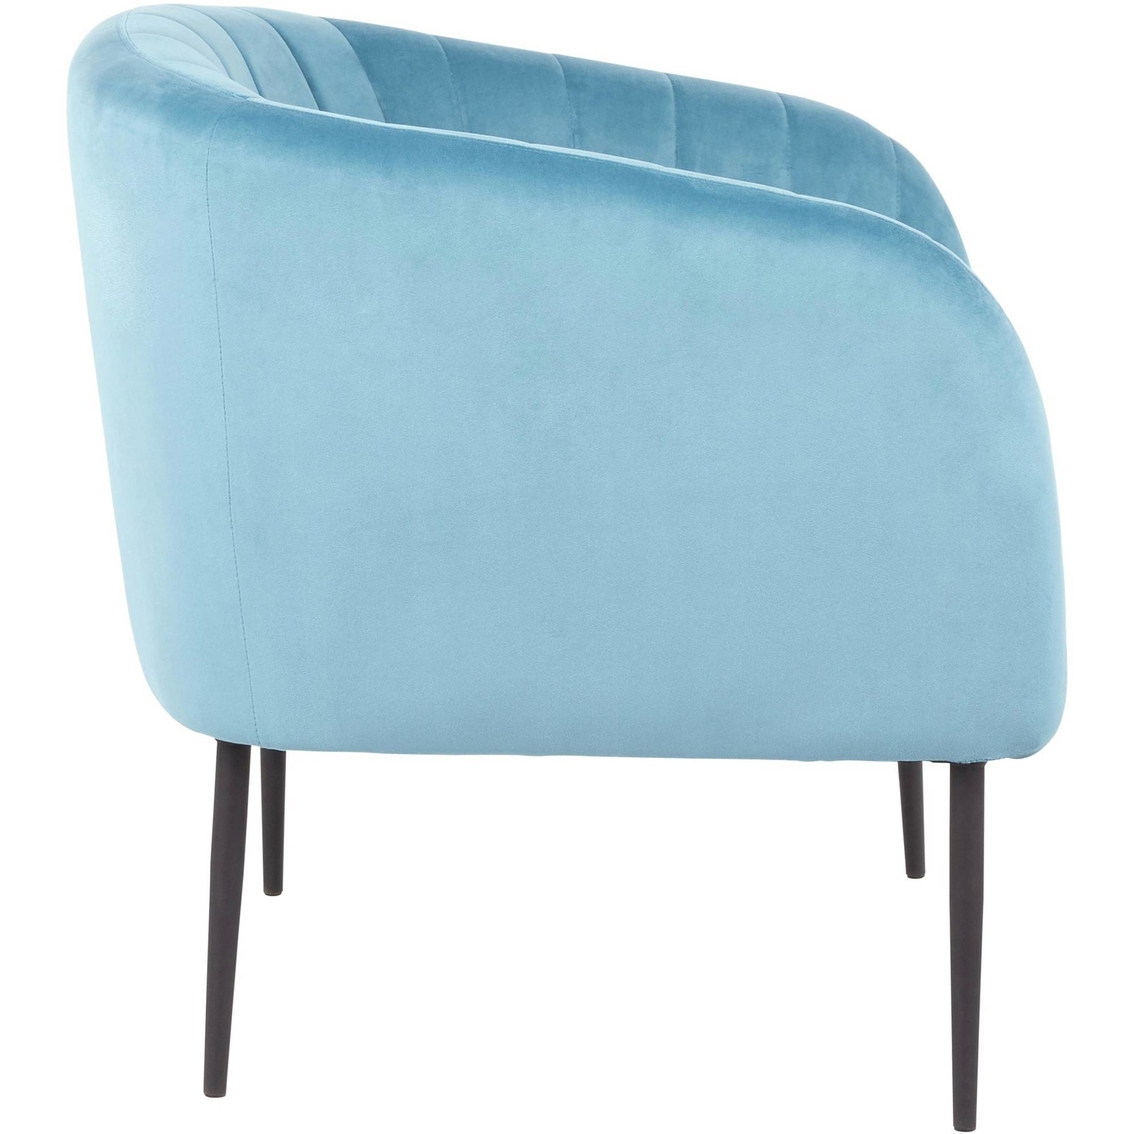 LumiSource Renee Accent Chair - Image 4 of 5